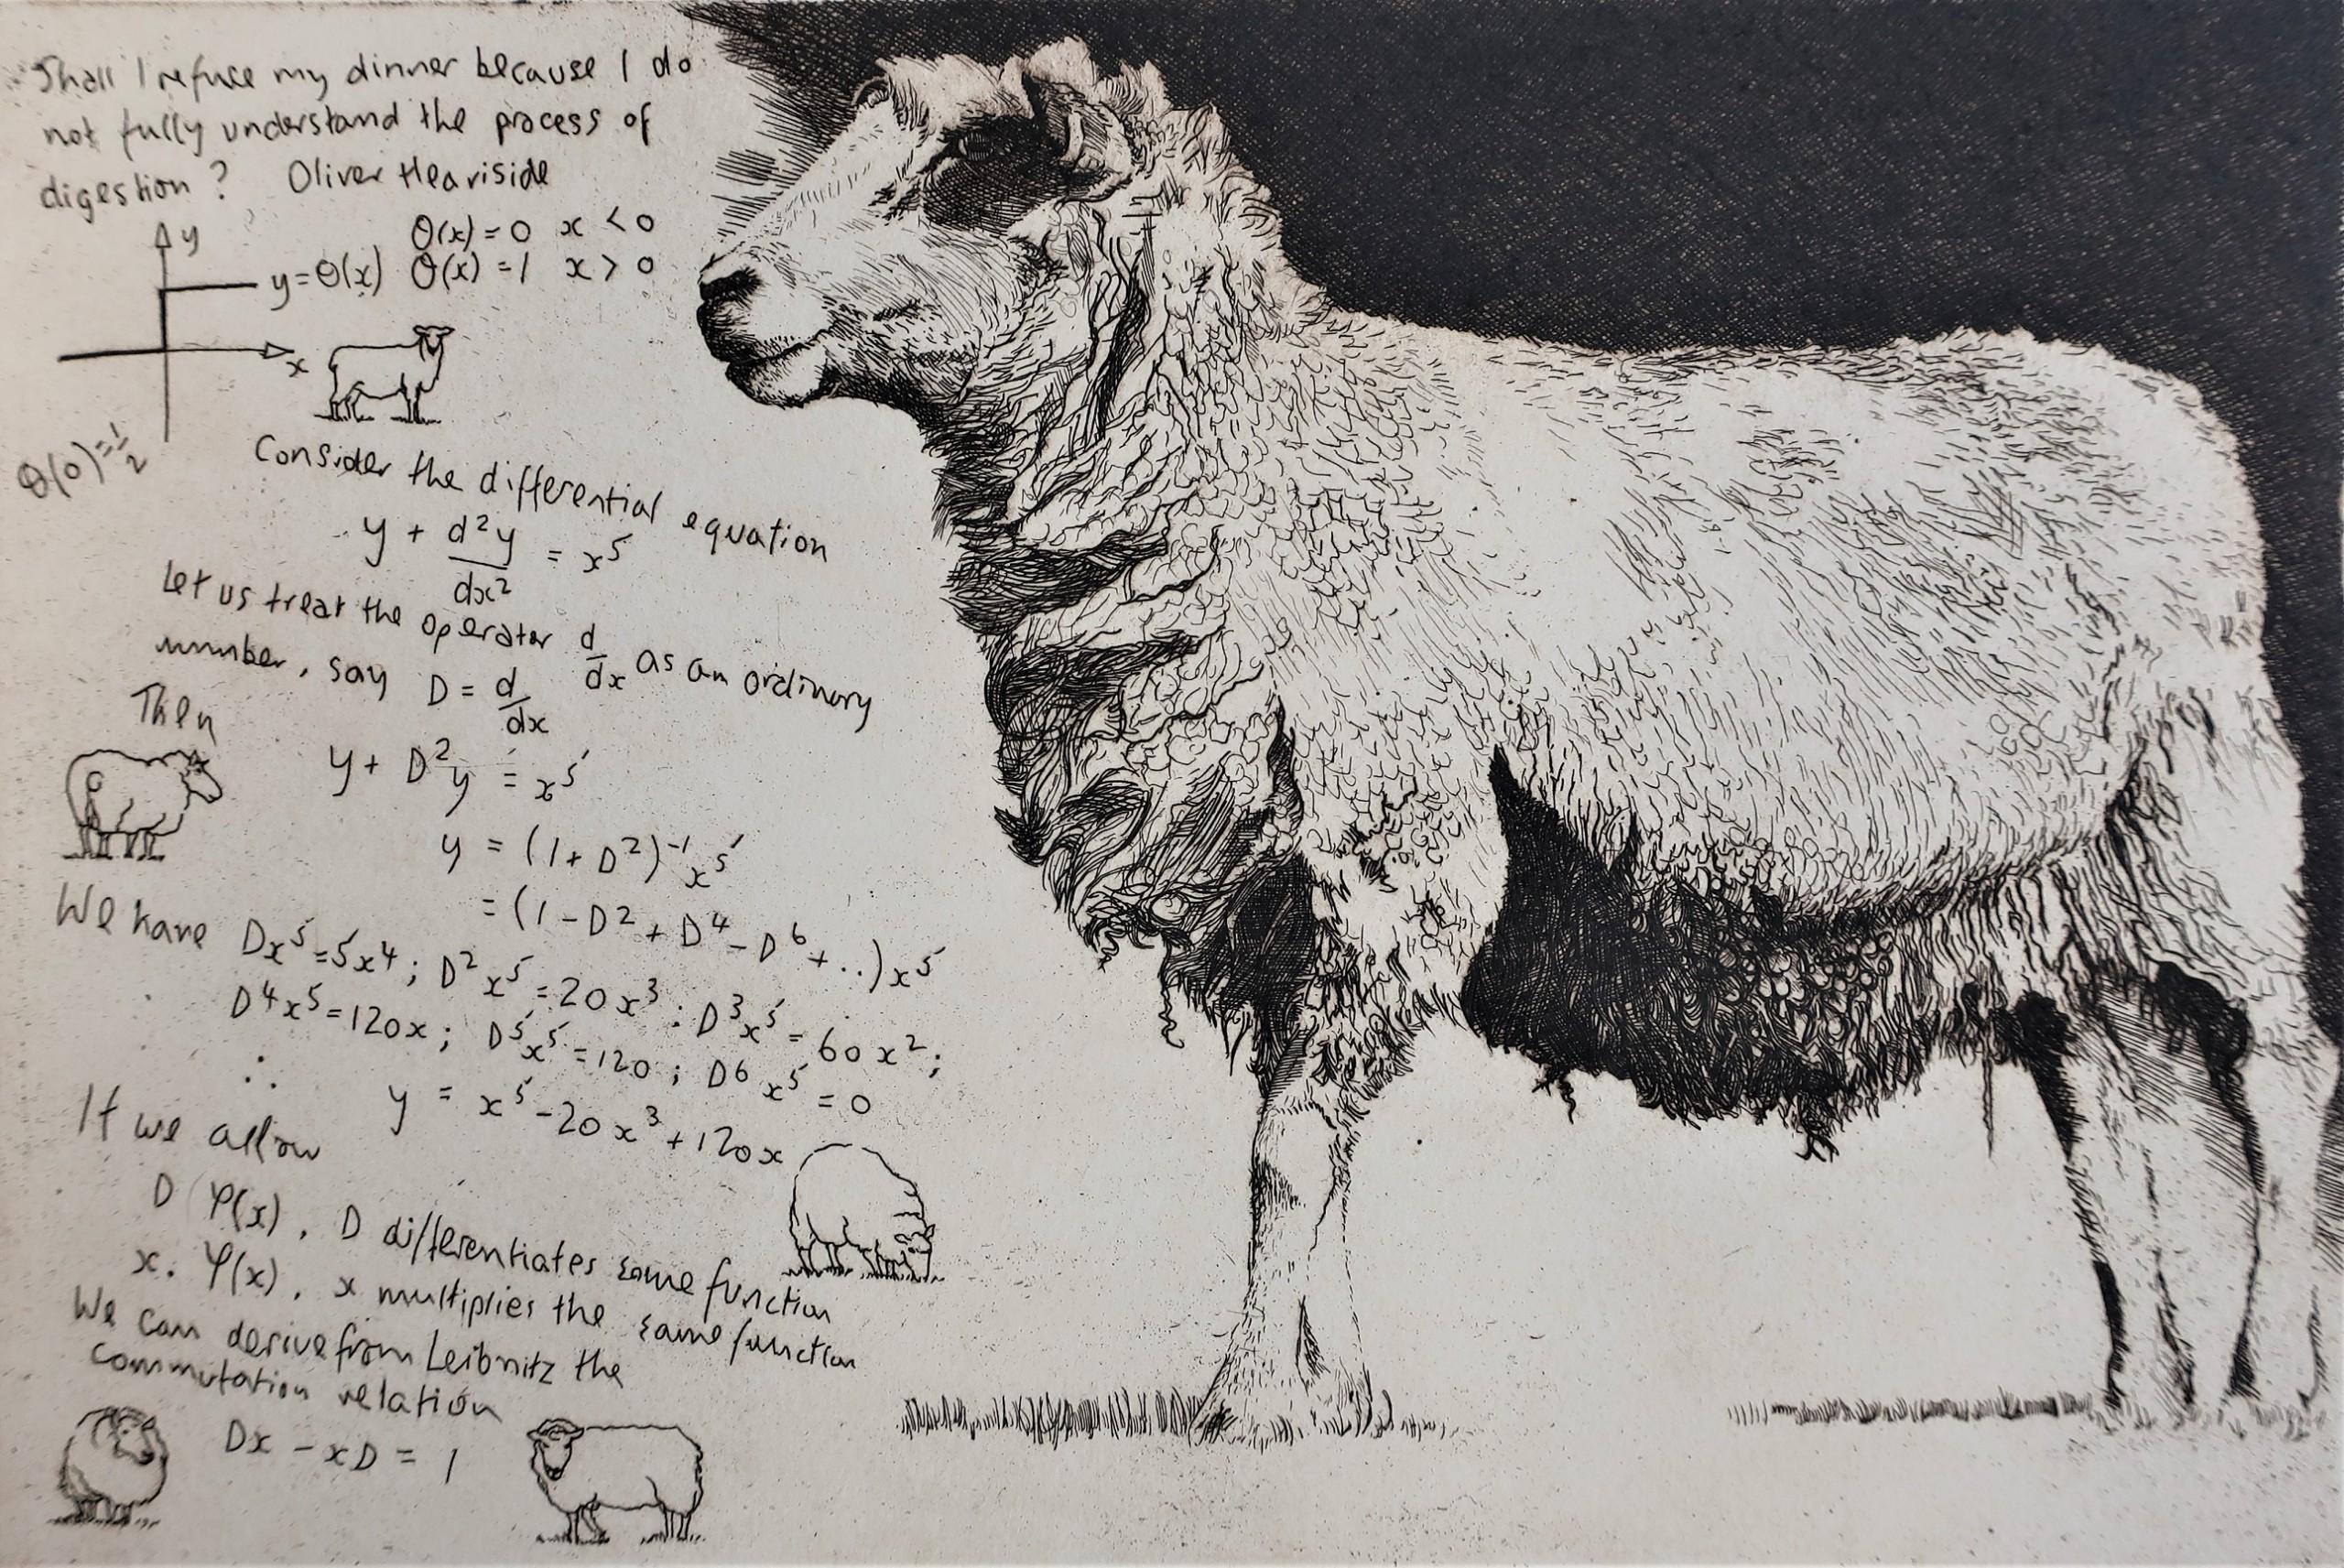 Heaviside Sheep is an original etching by Will Taylor. It explores animal images and mathematics, including the works of Oliver Heaviside. Each impression is marked on the reverse with the artist’s studio stamp.

Additional Information:
WILL